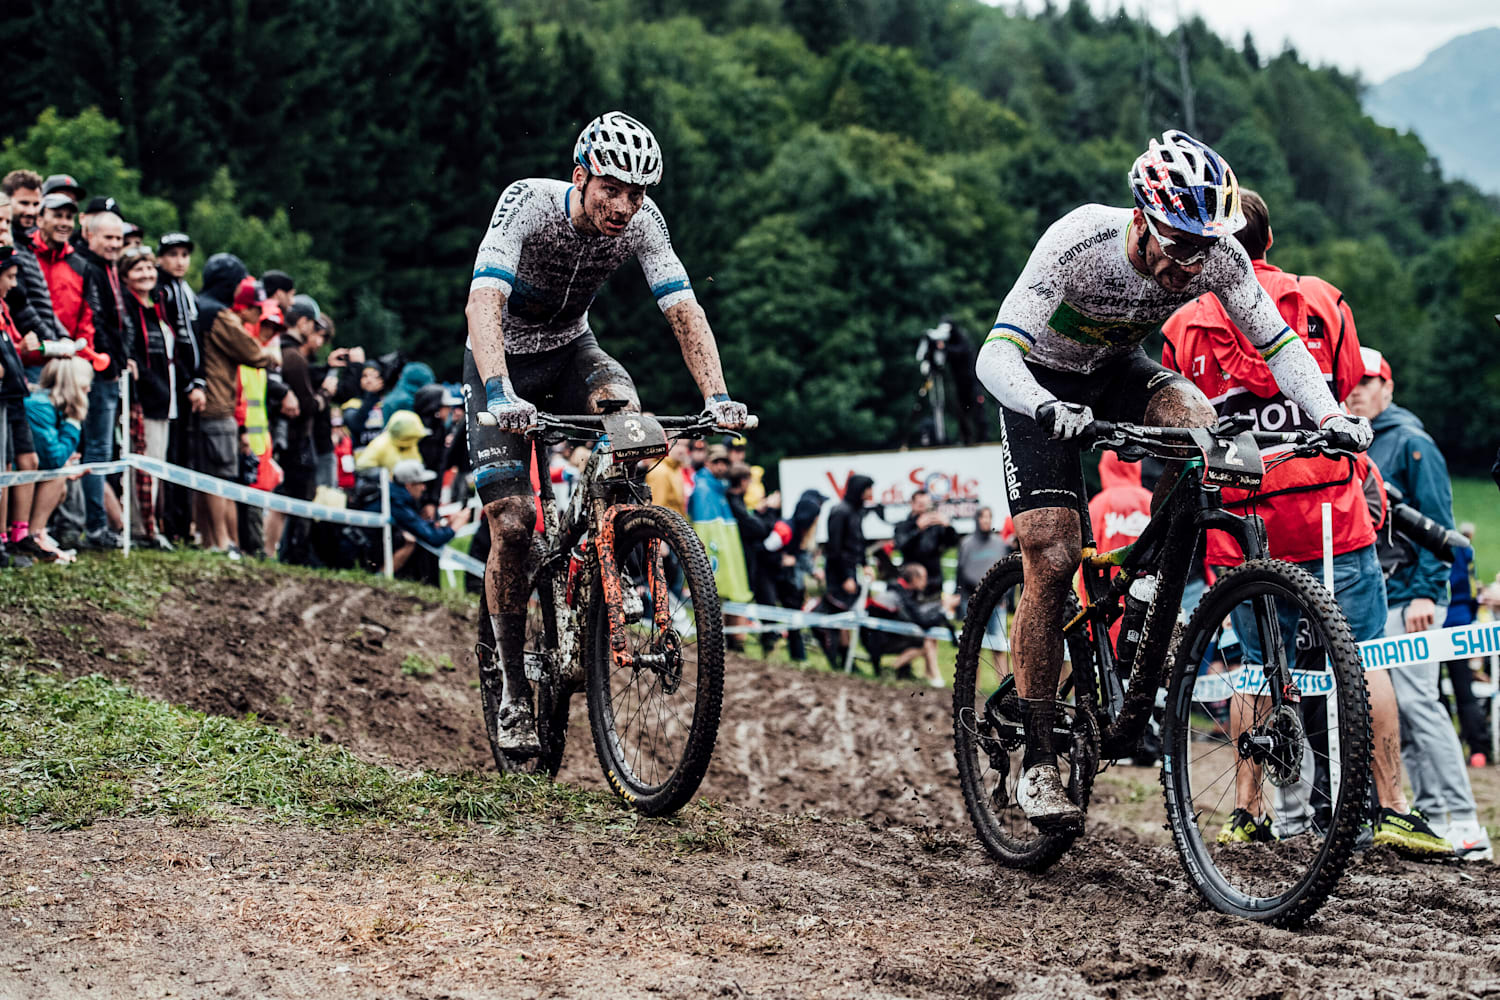 Uci Mountain Bike 2021 Les Gets Xco Track Explanation Images and